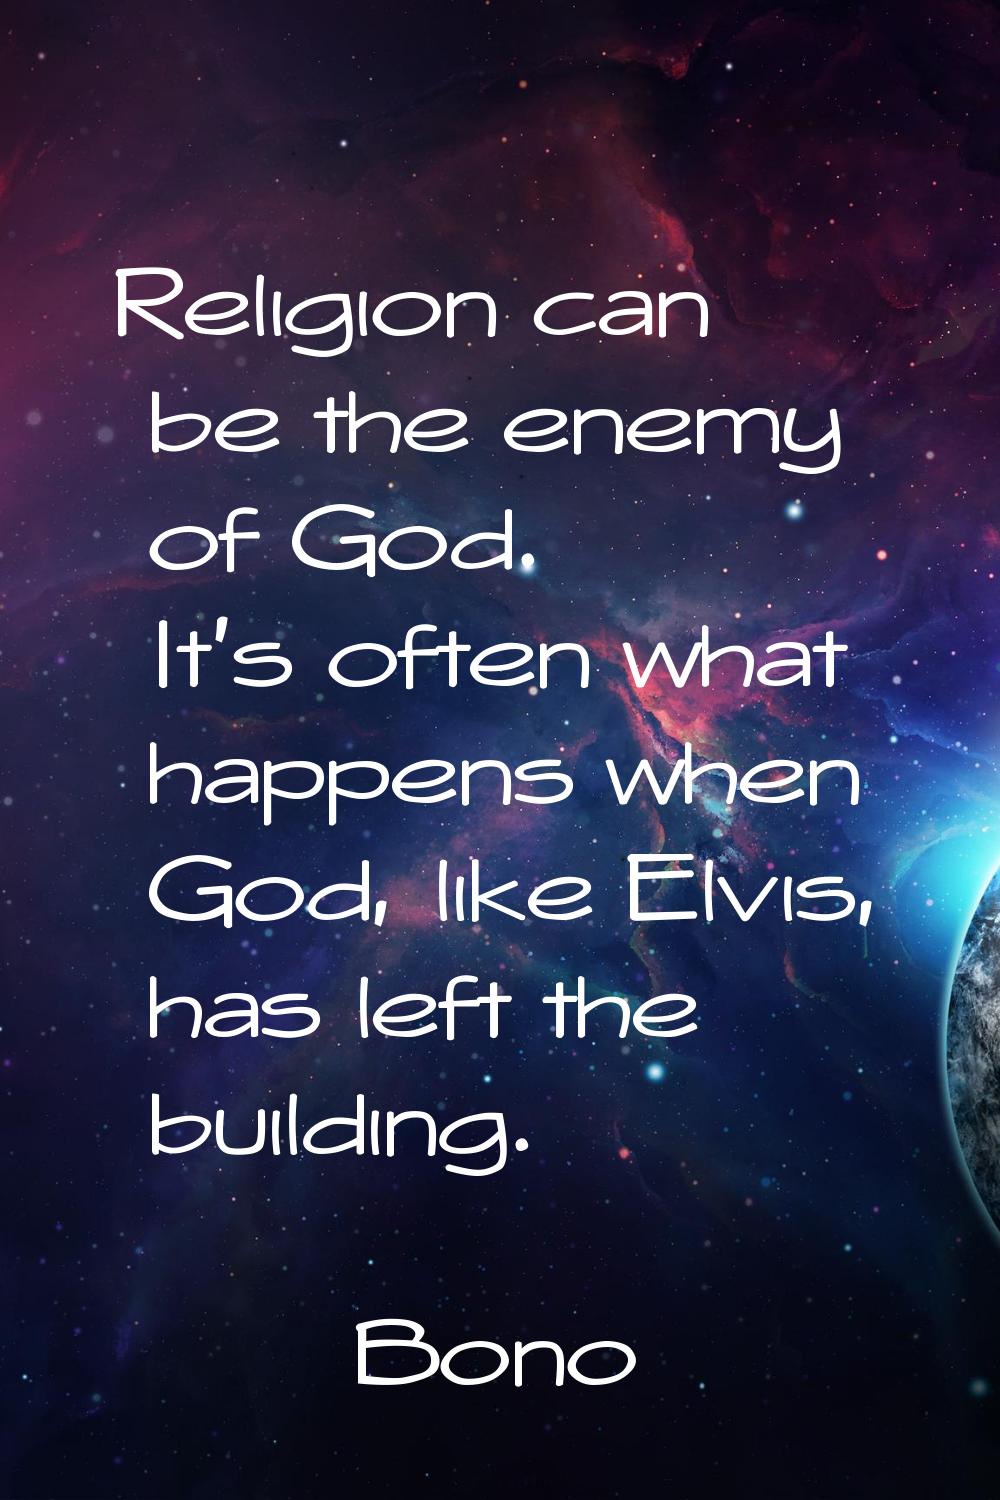 Religion can be the enemy of God. It's often what happens when God, like Elvis, has left the buildi